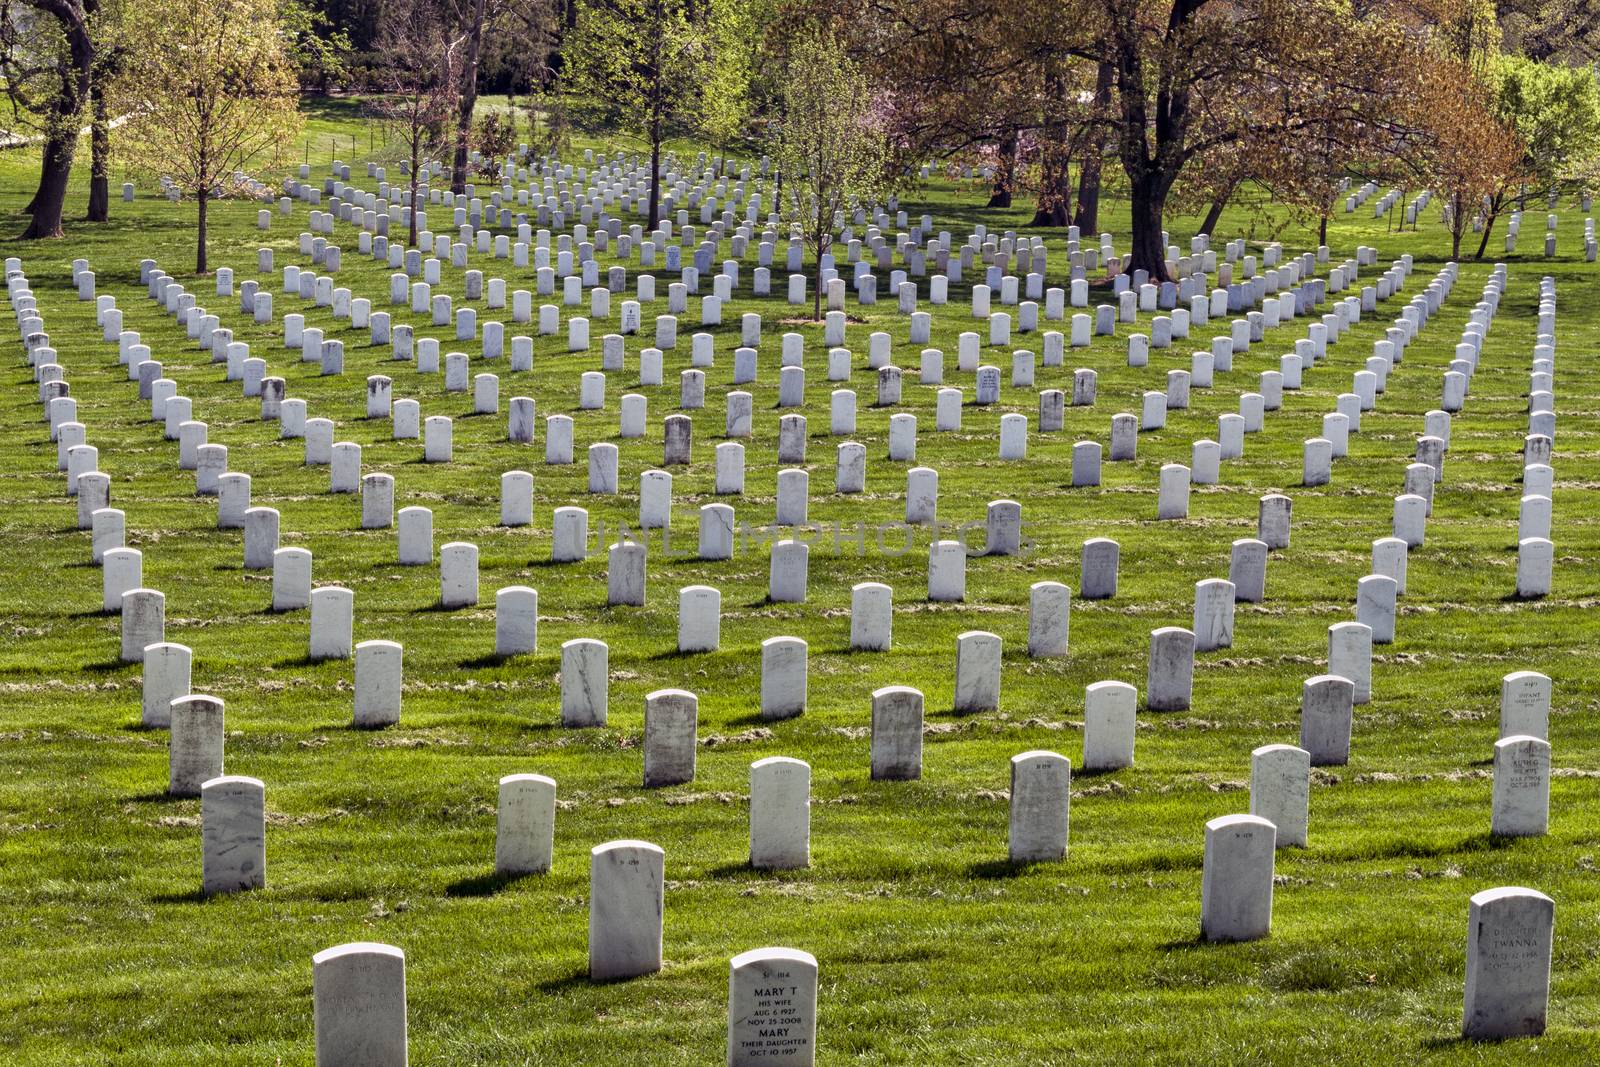 Headstones at Arlington National Cemetery by Moonb007